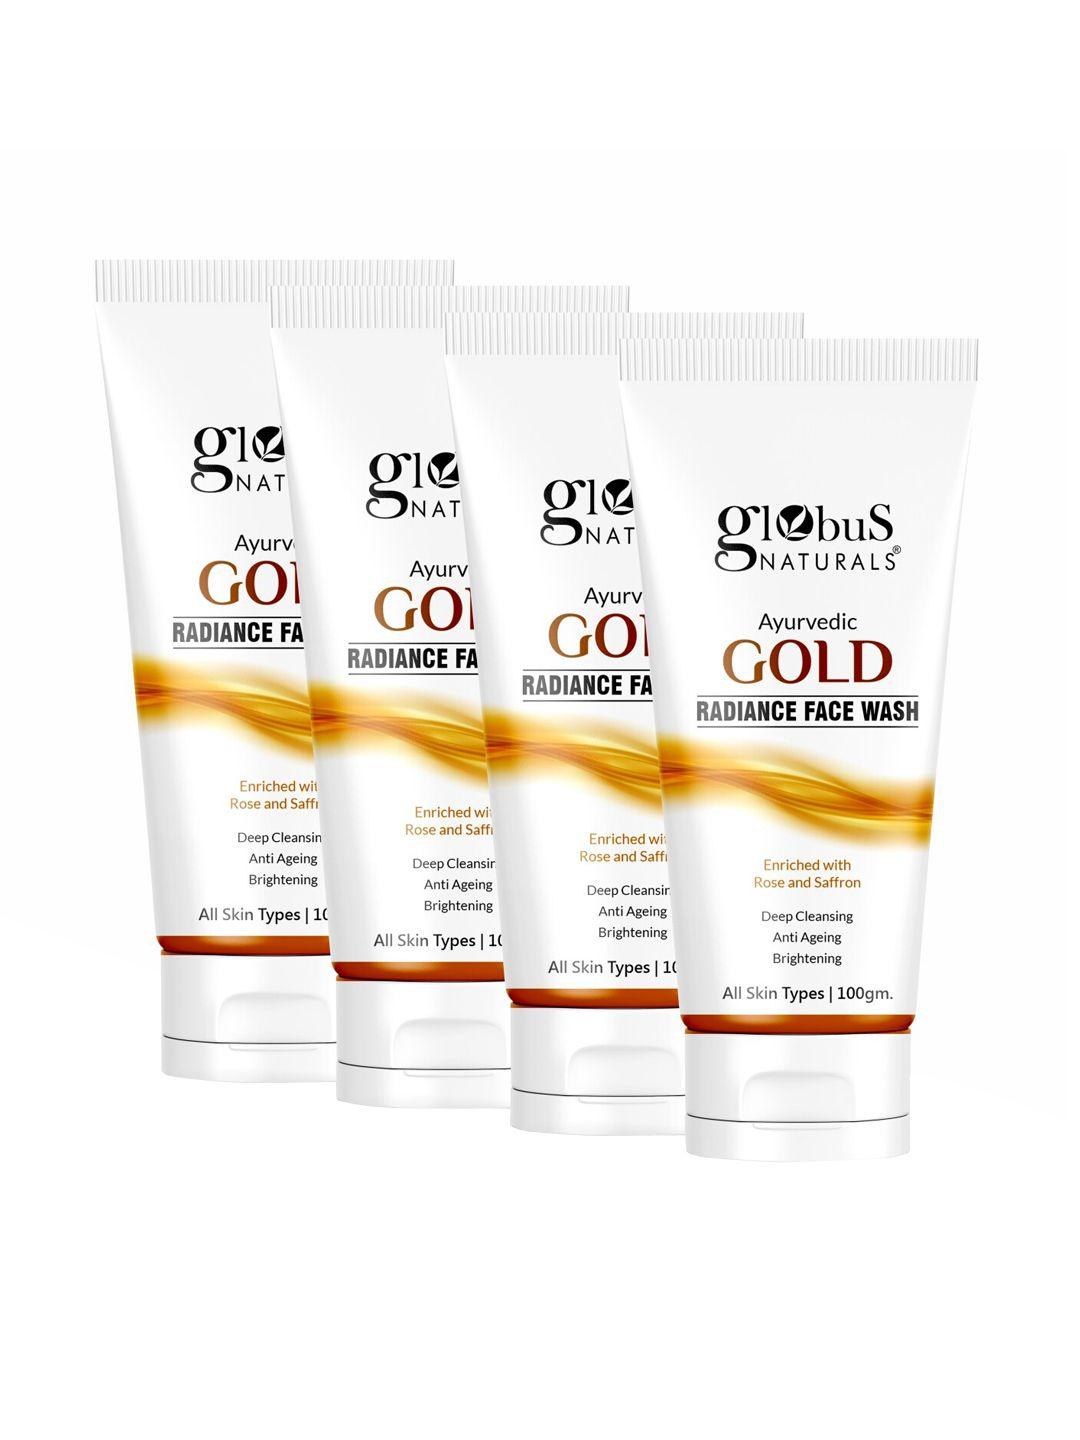 globus naturals set of 4 gold radiance anti-ageing & brightening face wash - 100g each